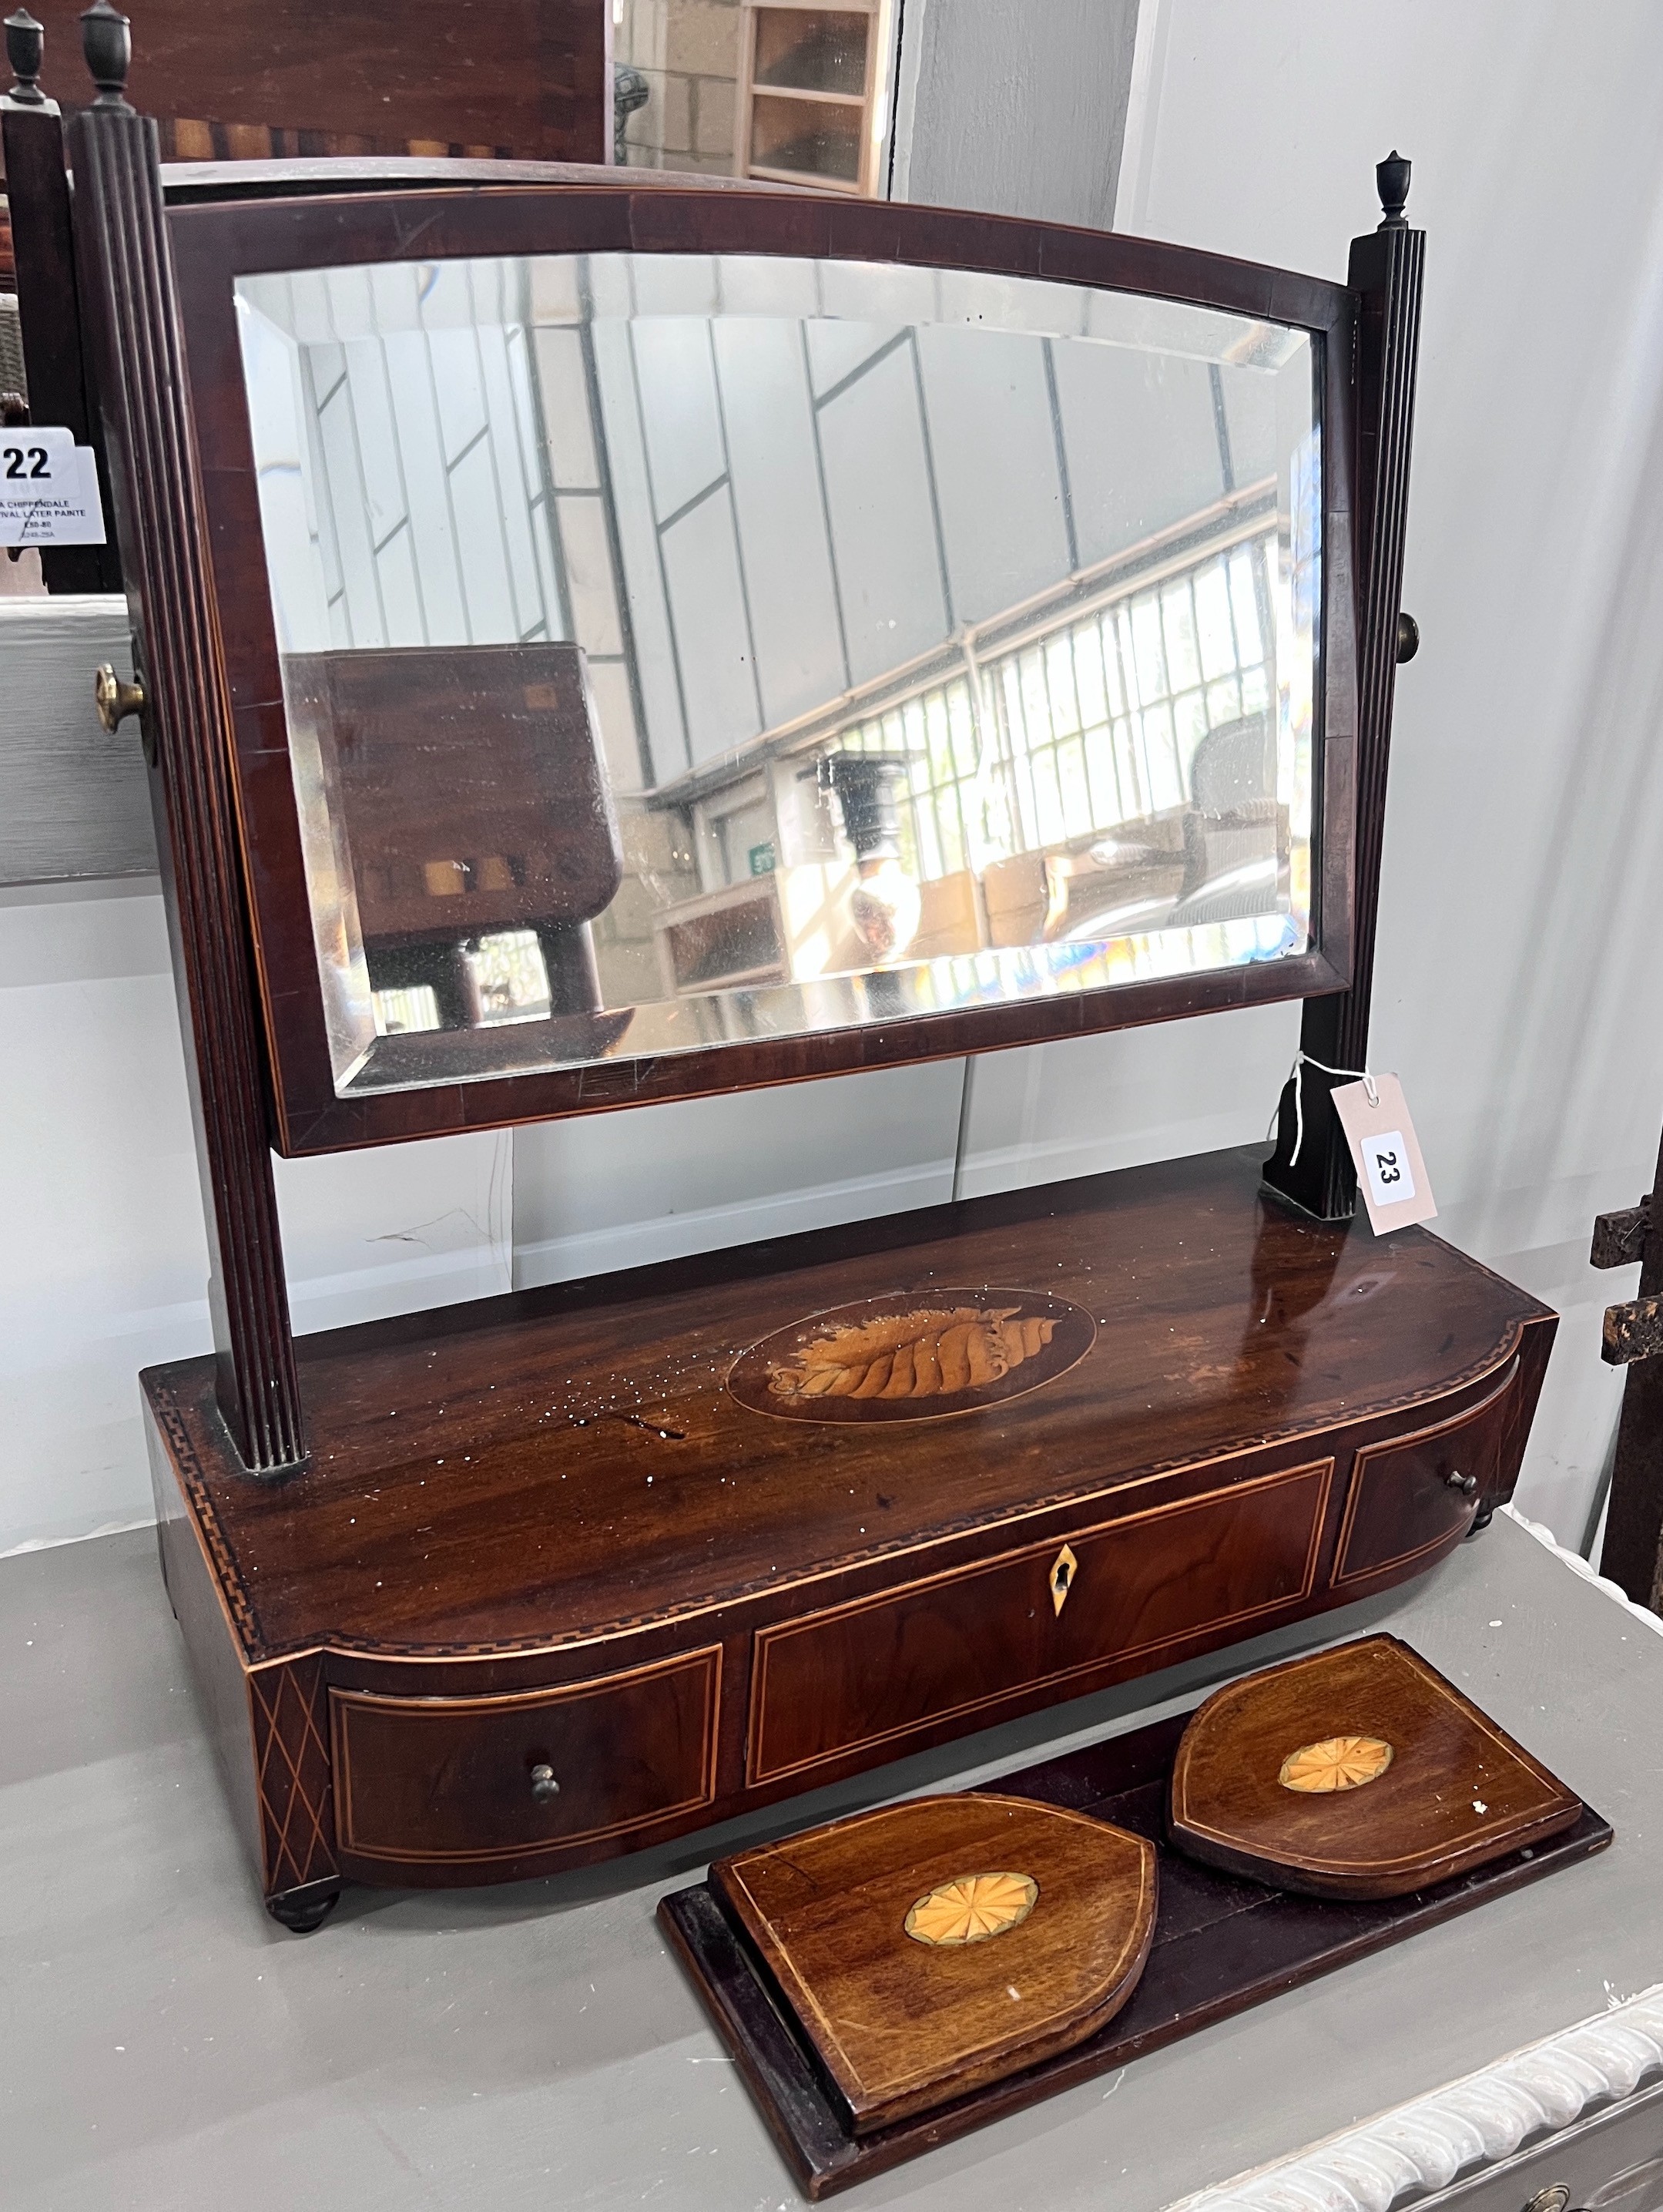 A George III inlaid mahogany toilet mirror, width 55cm, height 57cm together with an Edwardian